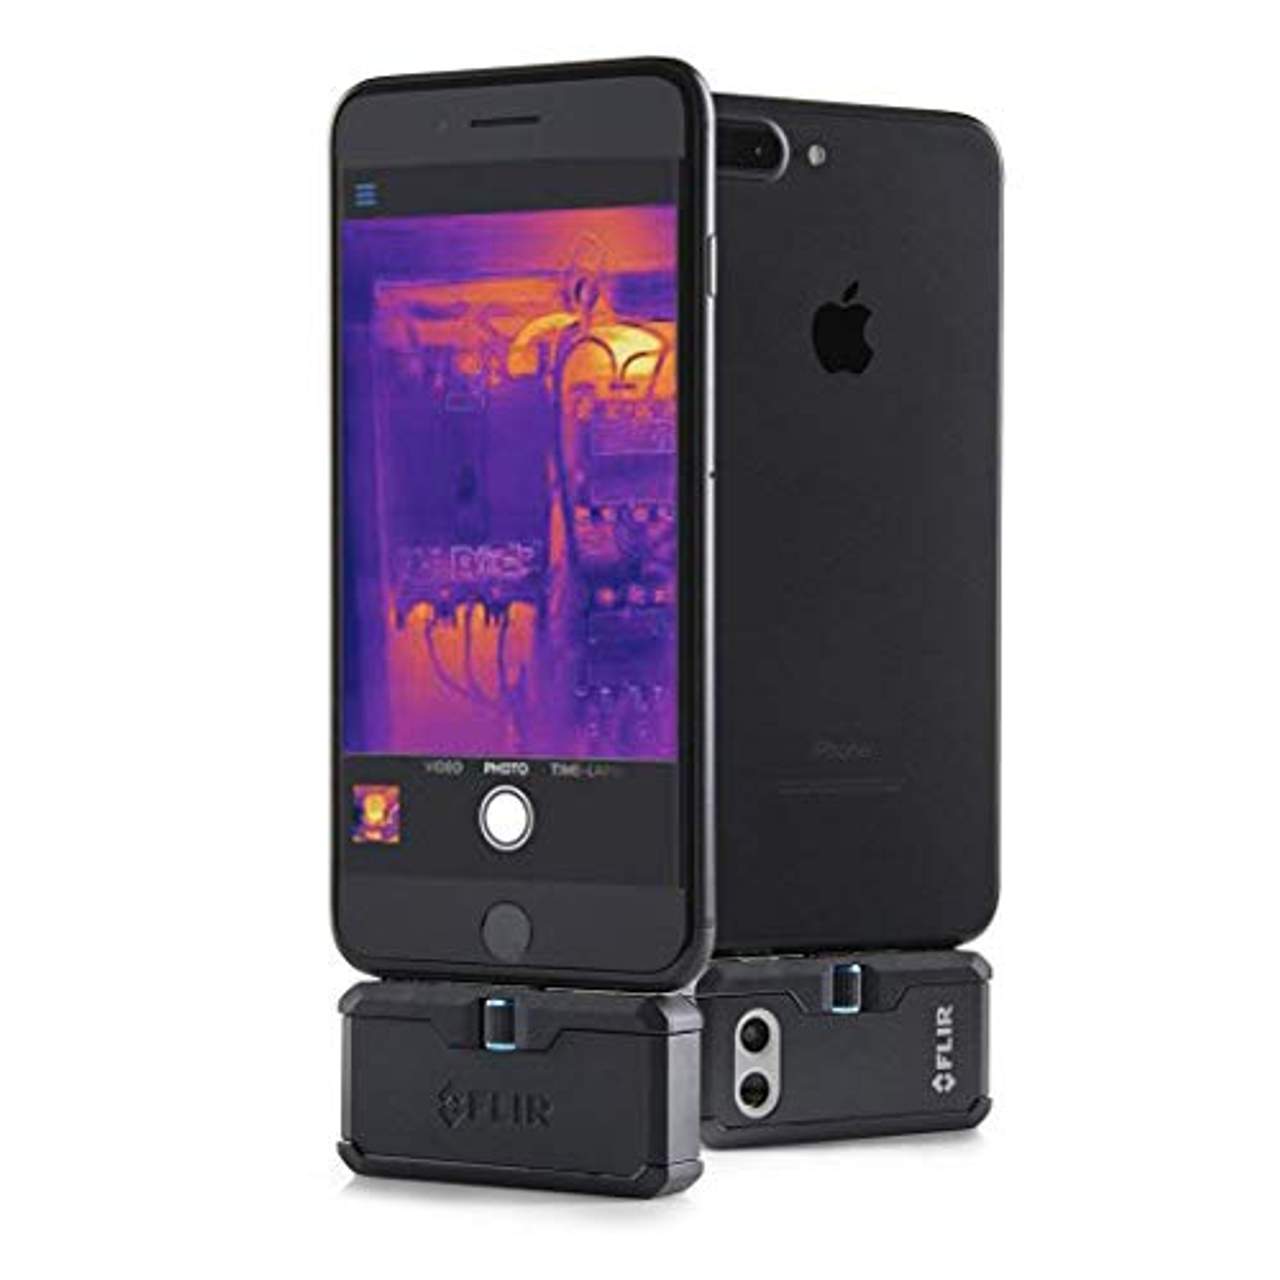 FLIR ONE Pro Lt for iOS & ONE Pro LT Thermo Kamera für Android